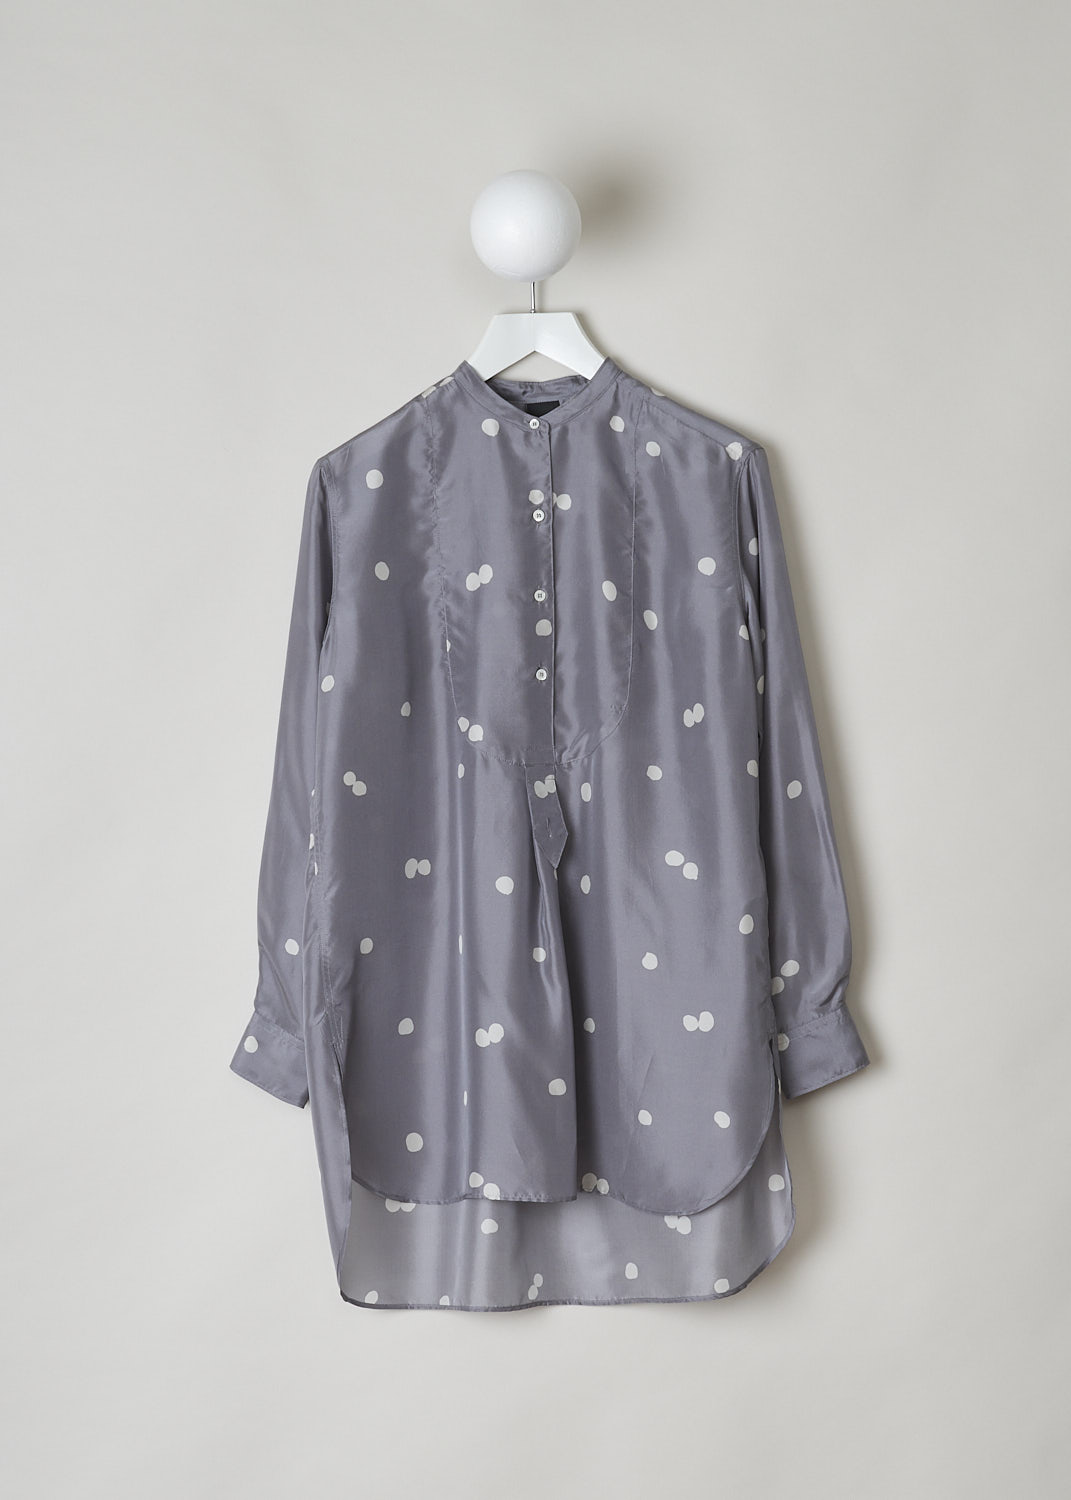 ASPESI, GREY LONG SLEEVE BLOUSE WITH DOTTED PRINT, 5441_M278_62187, Grey, Print, Silver, Front, This grey silk blouse has a pale grey dotted print. The blouse has a mandarin collar with a four button closure down the front. The long sleeves have buttoned cuffs. In the back, along the back yoke, crystal pleats drape the fabric. The blouse has a rounded hemline with an asymmetrical finish, meaning the back is longer than the front. 
